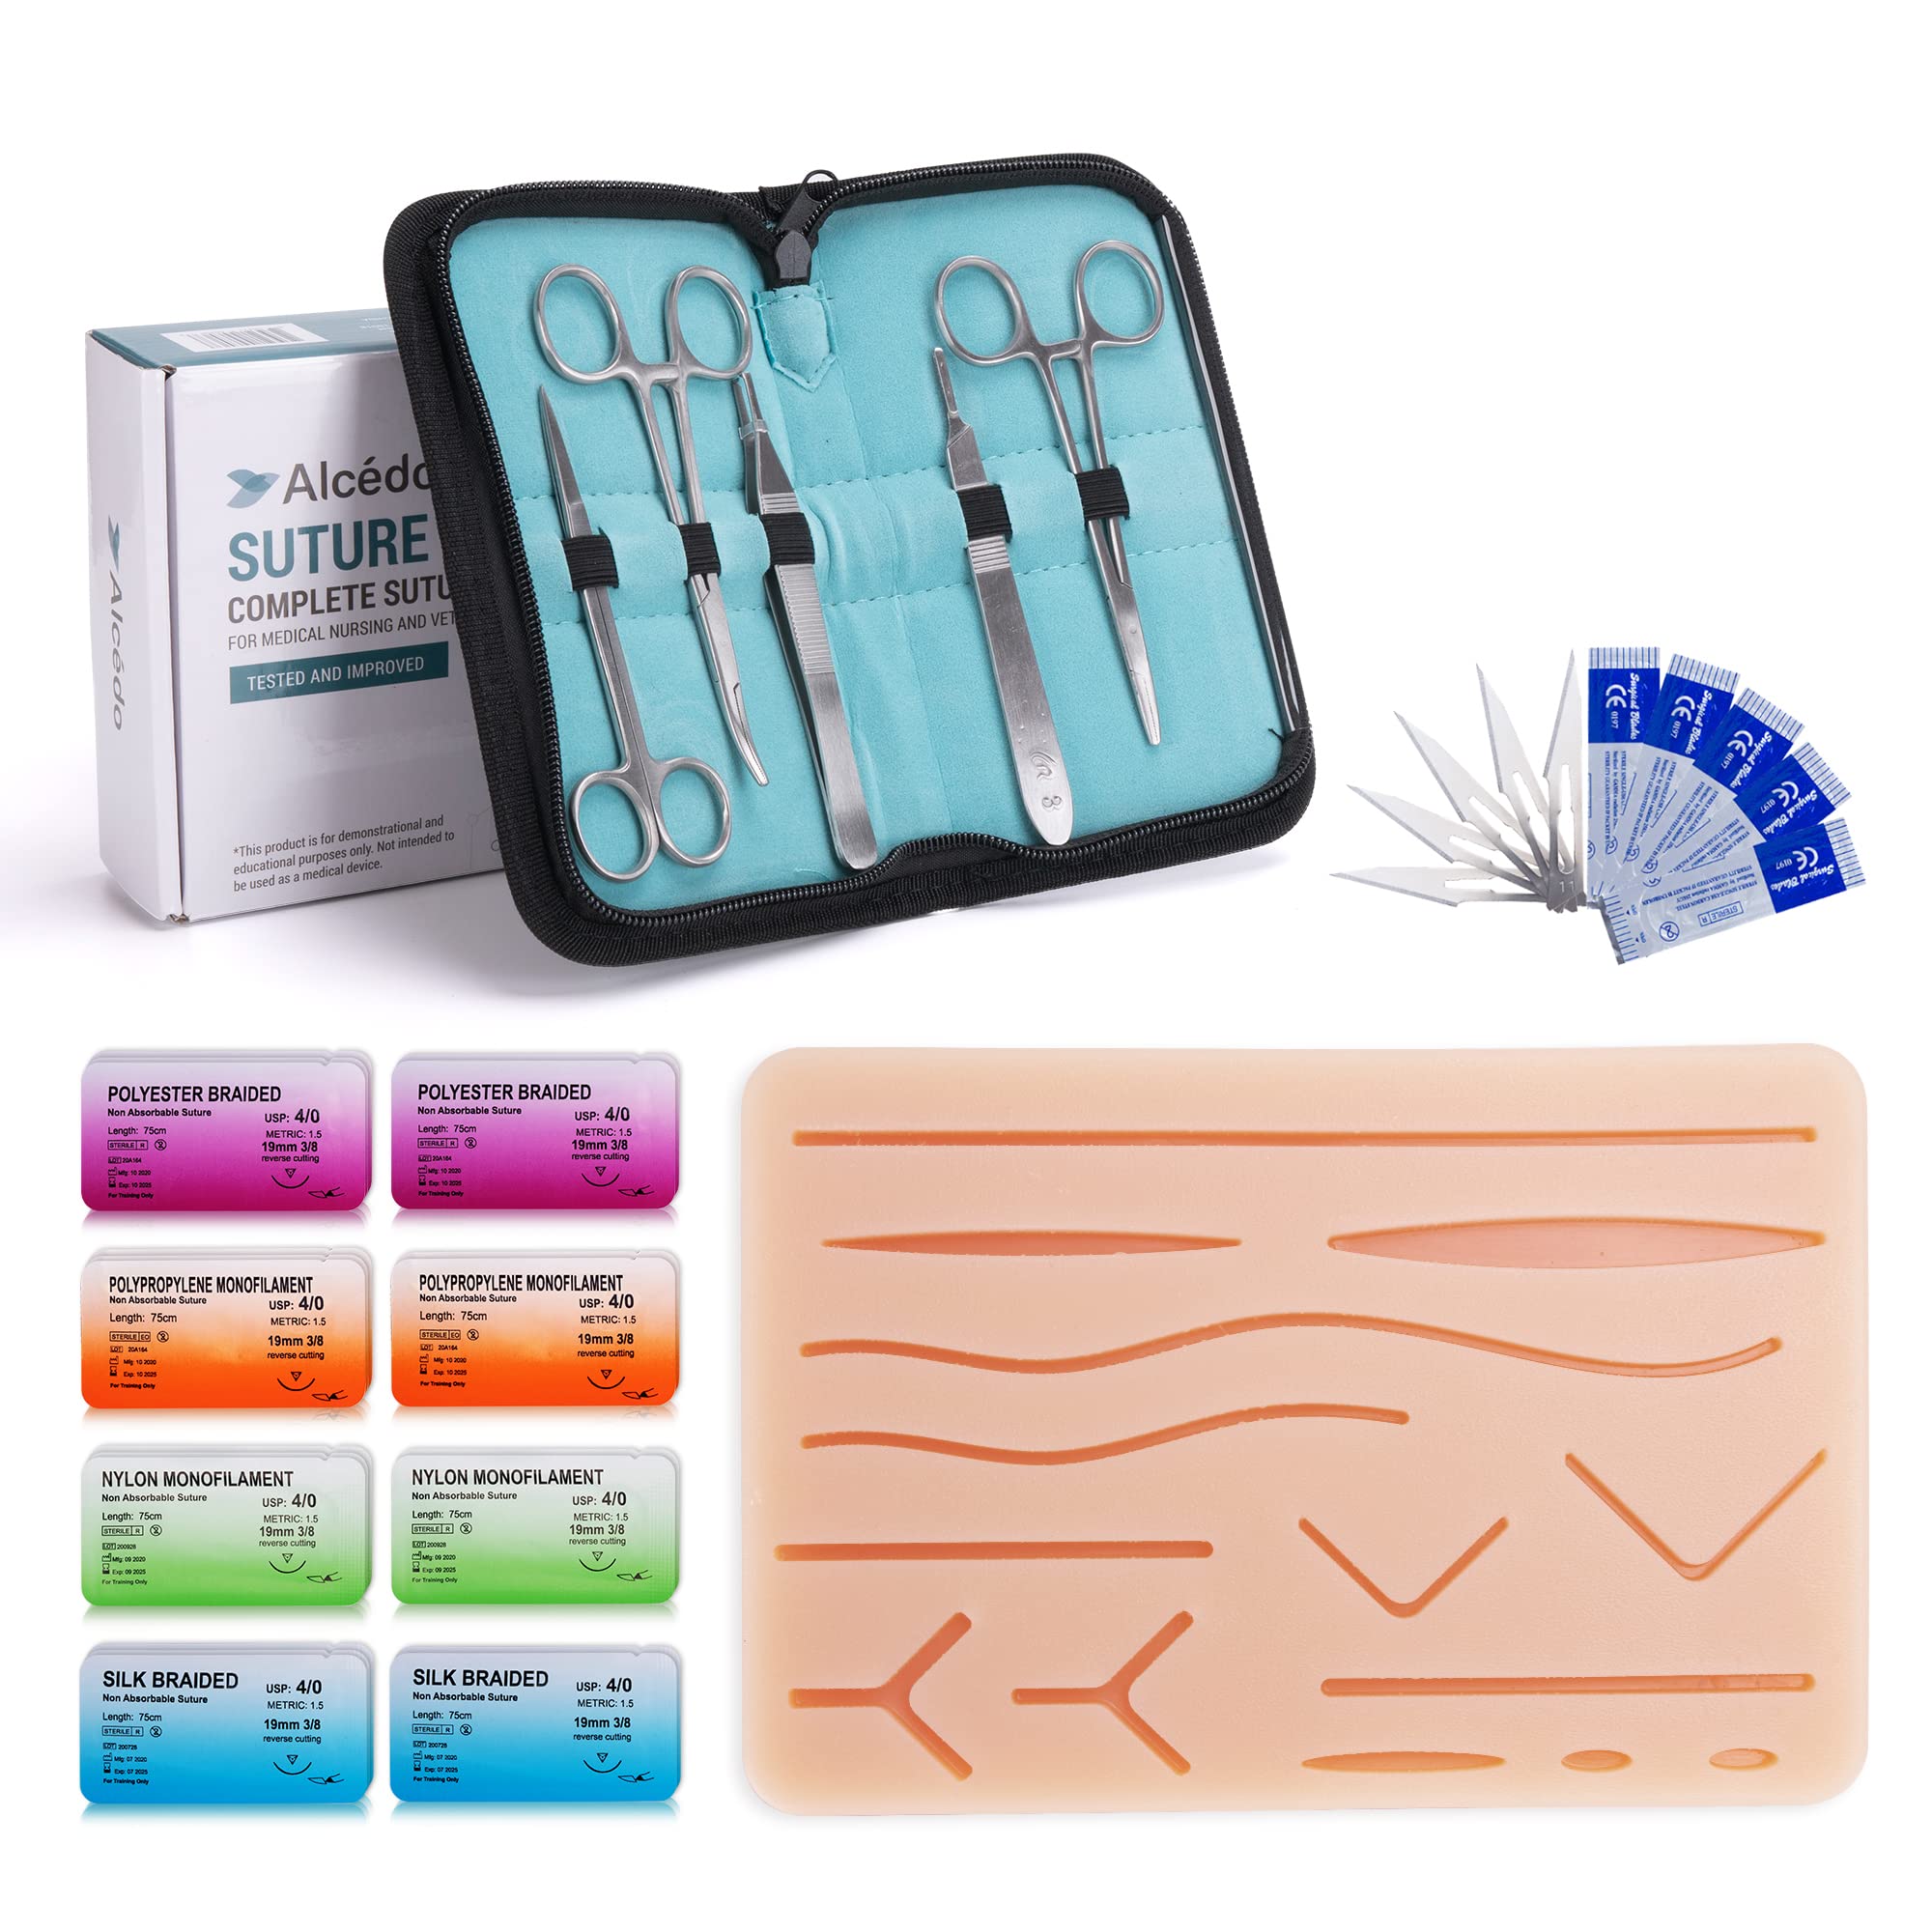 Advanced Suture Practice Kit for Medical Students (35 Pcs) – Tool Kit with  Variety of Suture Threads, 3 Top Quality Suture Pads (Education Only)